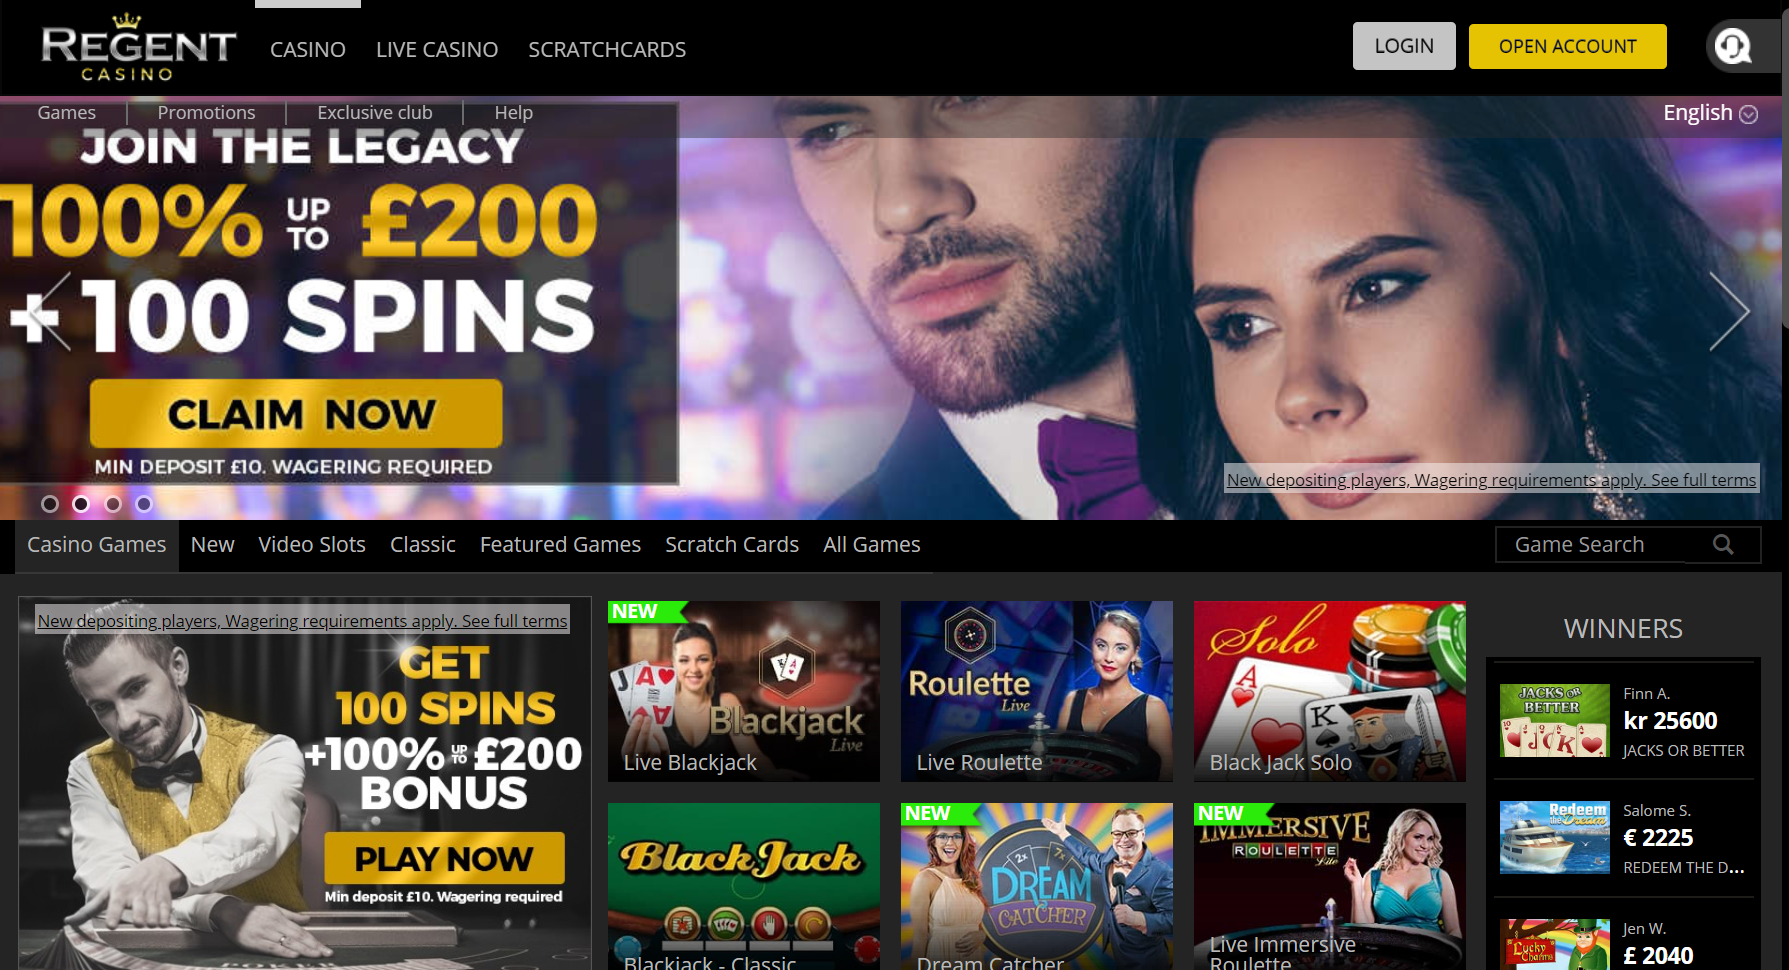 casino card game online